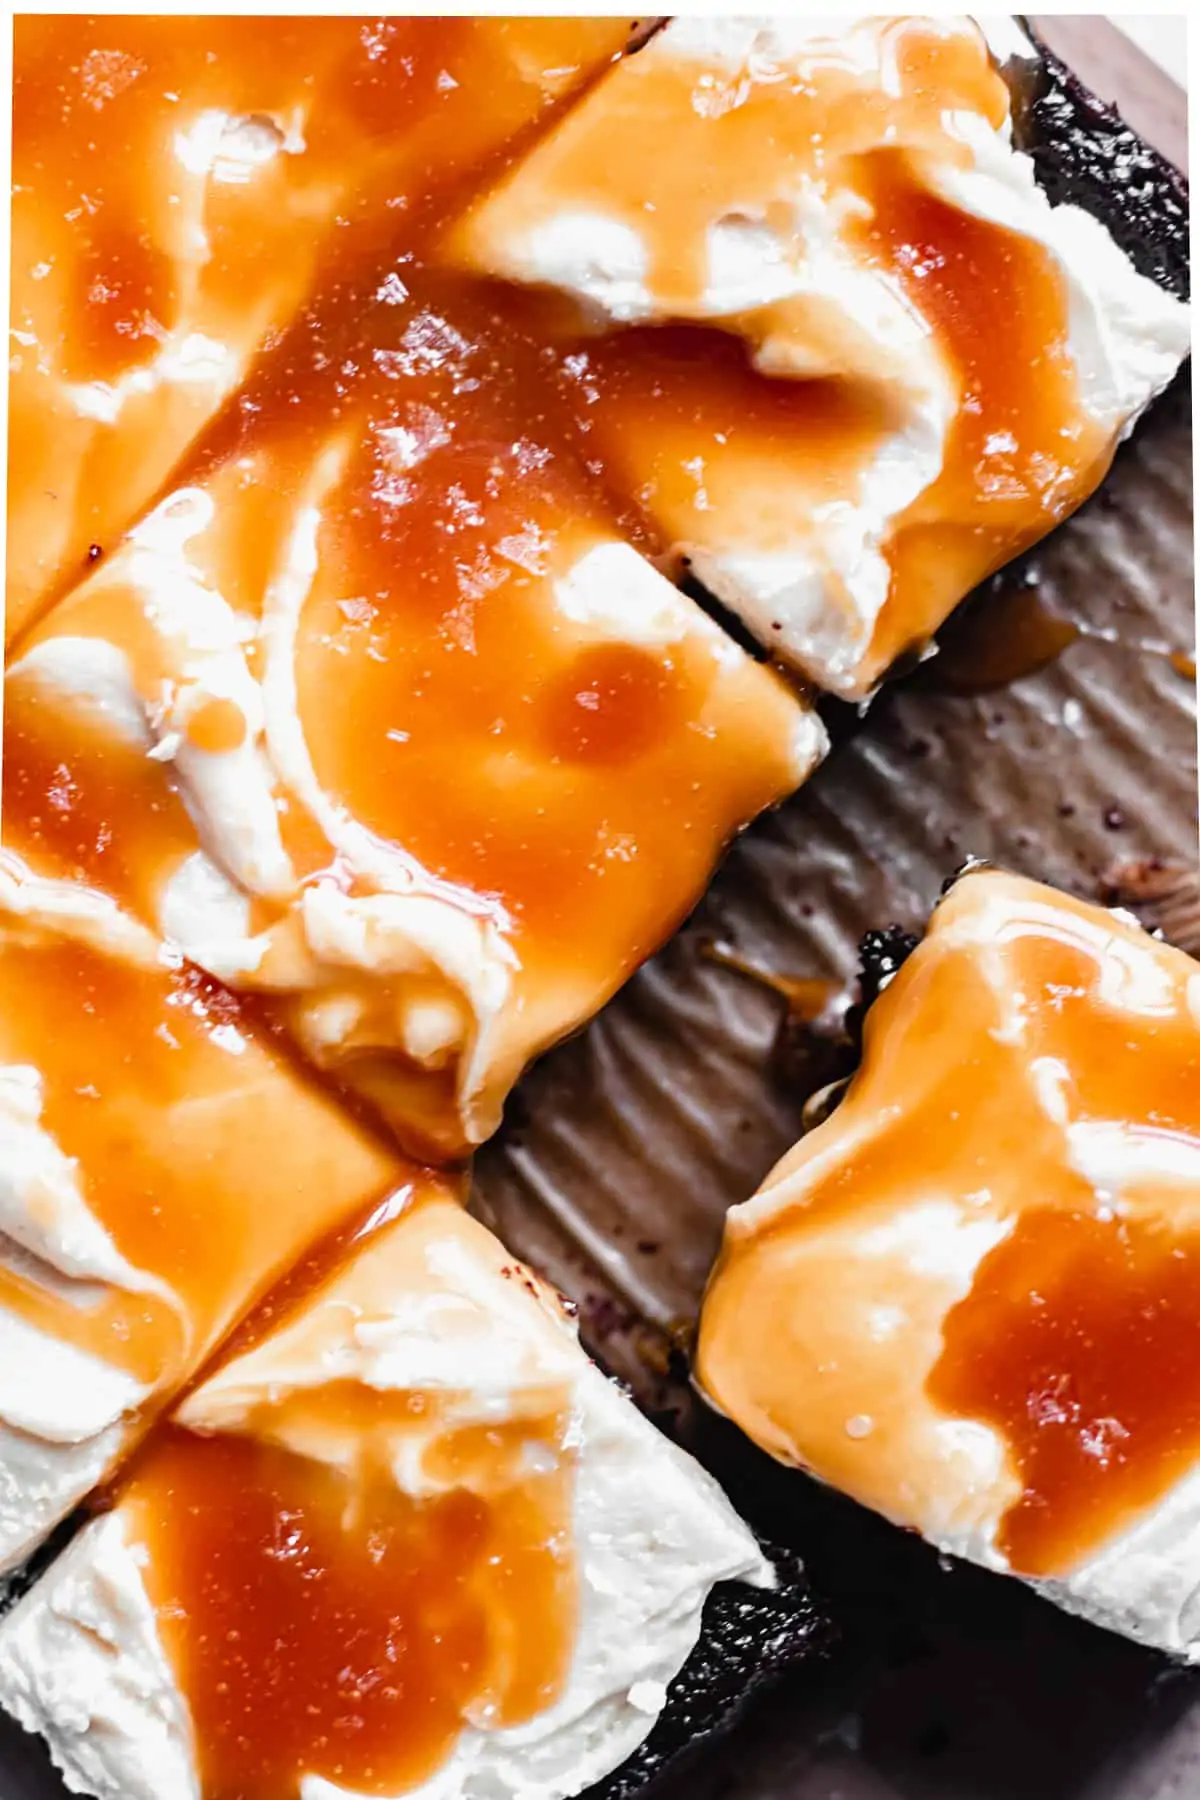 Overhead shot of cut snack cake with caramel on top